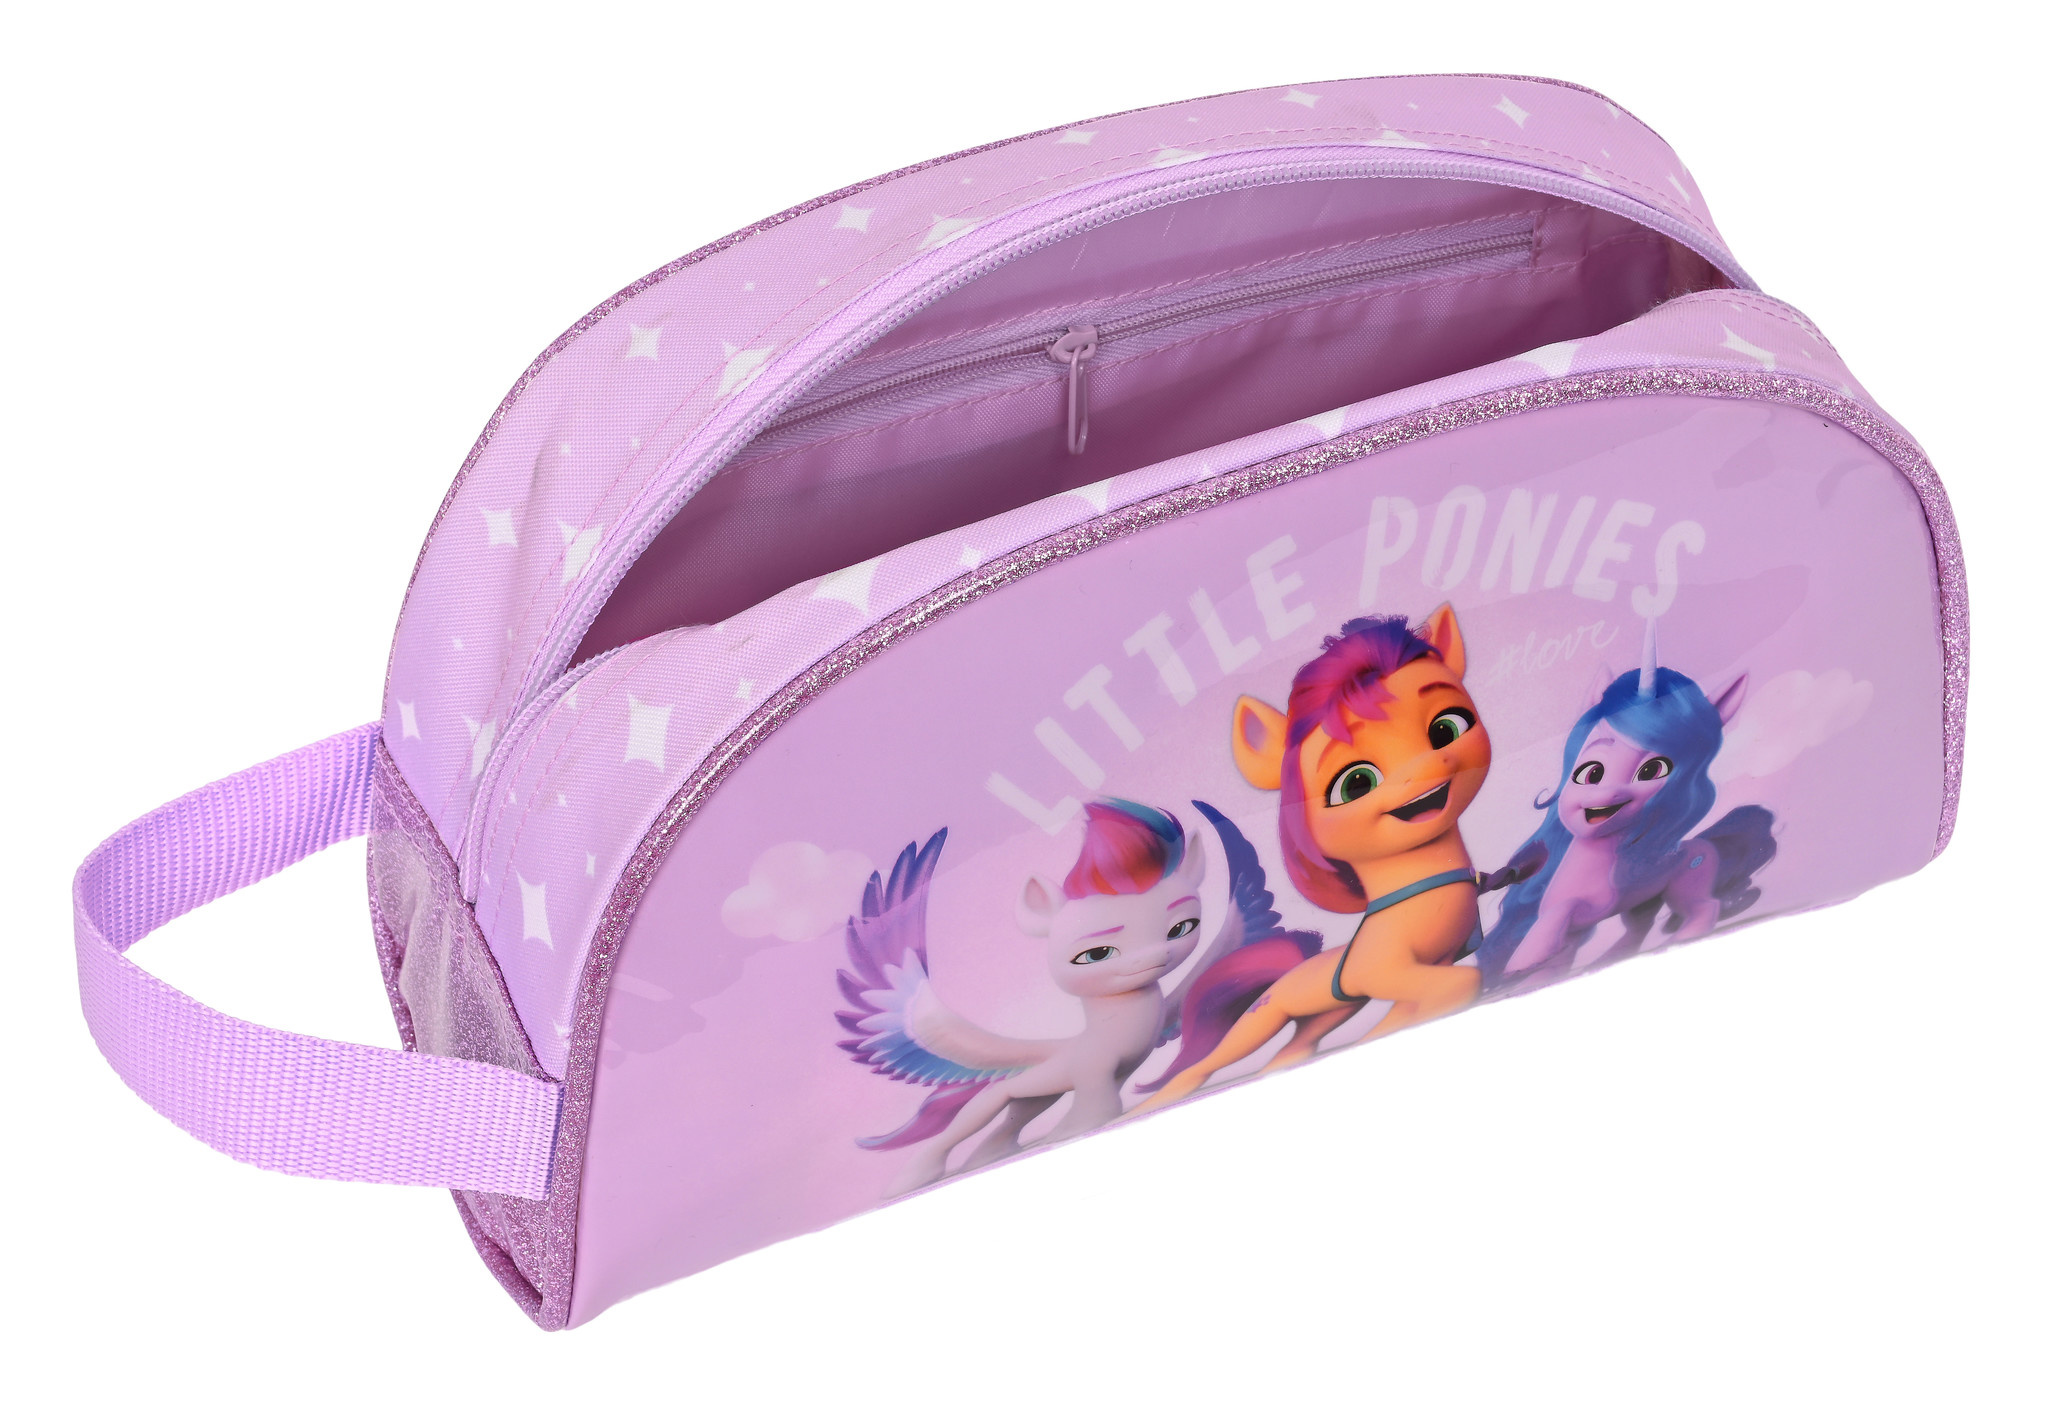 My little Pony Make-up Bag / Pouch, #love - 21 x 8 x 6 cm - Polyester